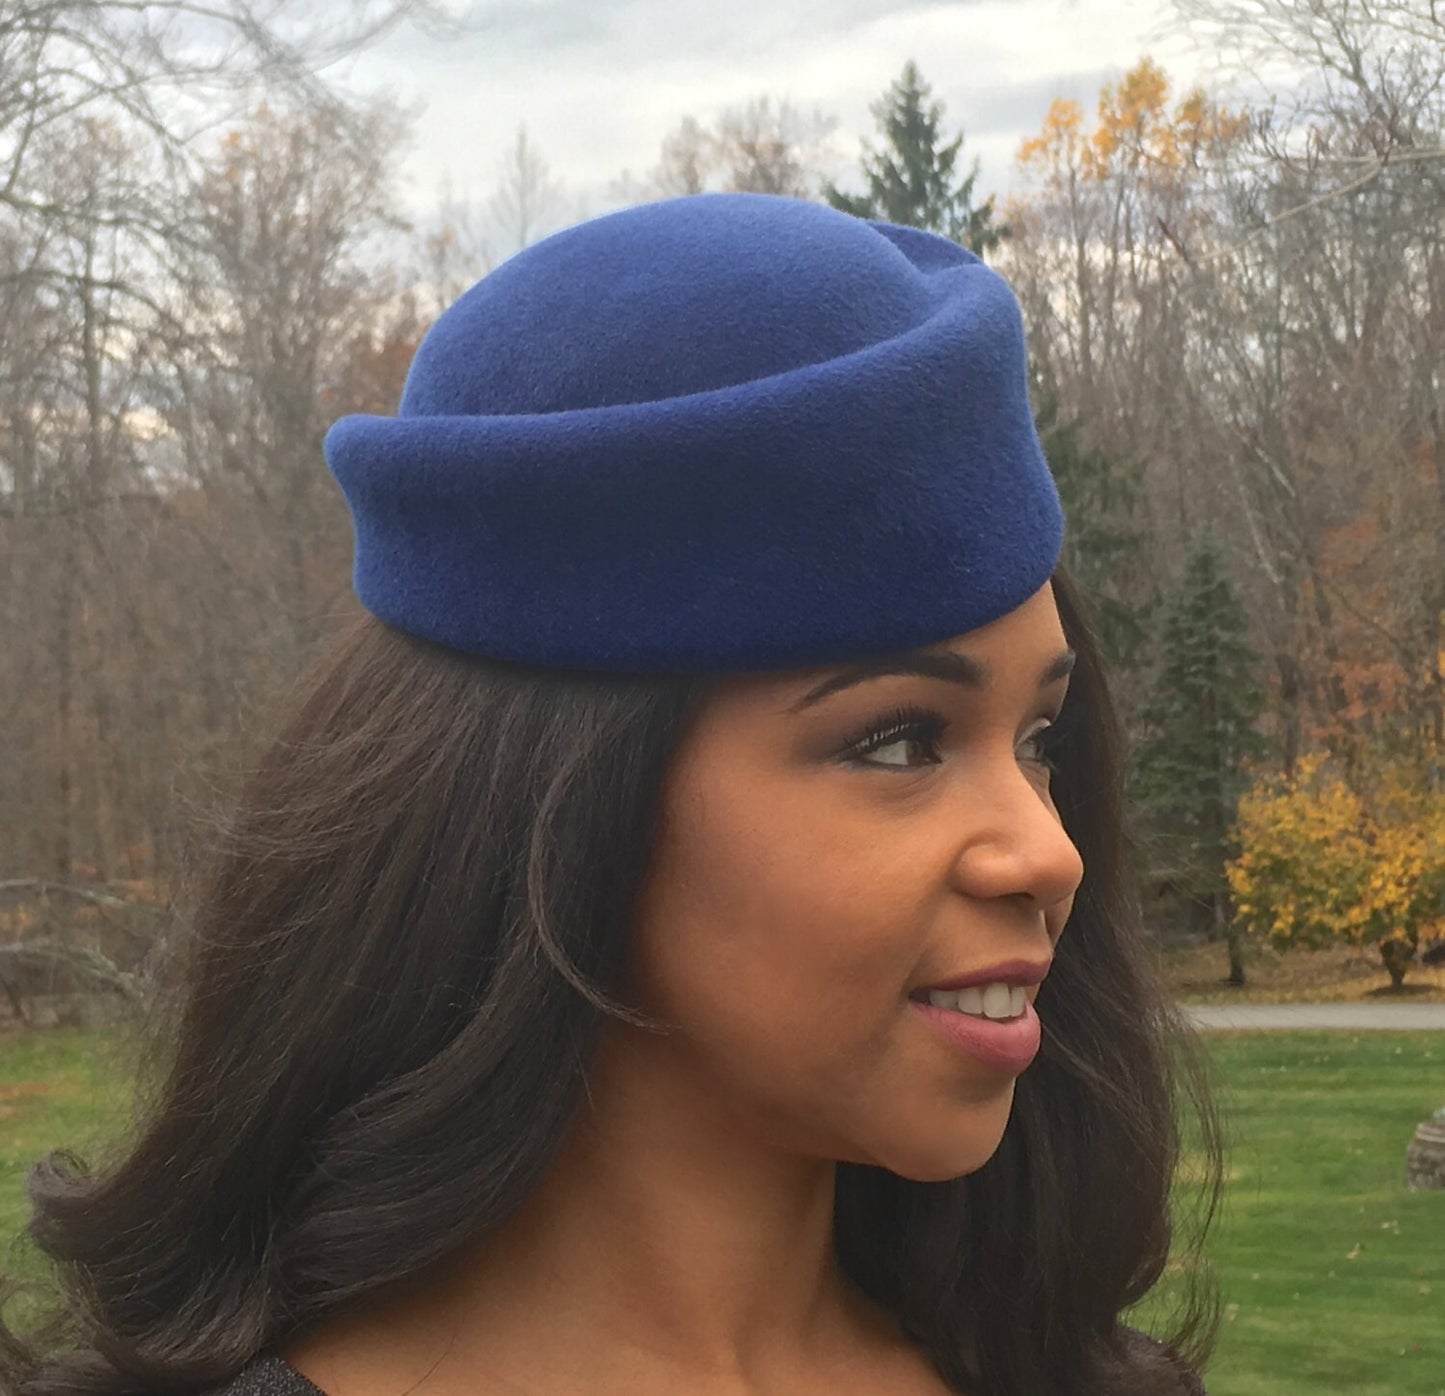 Royal Blue Wool Felt Pillbox Hat! Vintage Style and Timeless. Church hat-Winter Races-Polo-Derby-Wedding-Mother of the Bride-Bridesmaids Hat